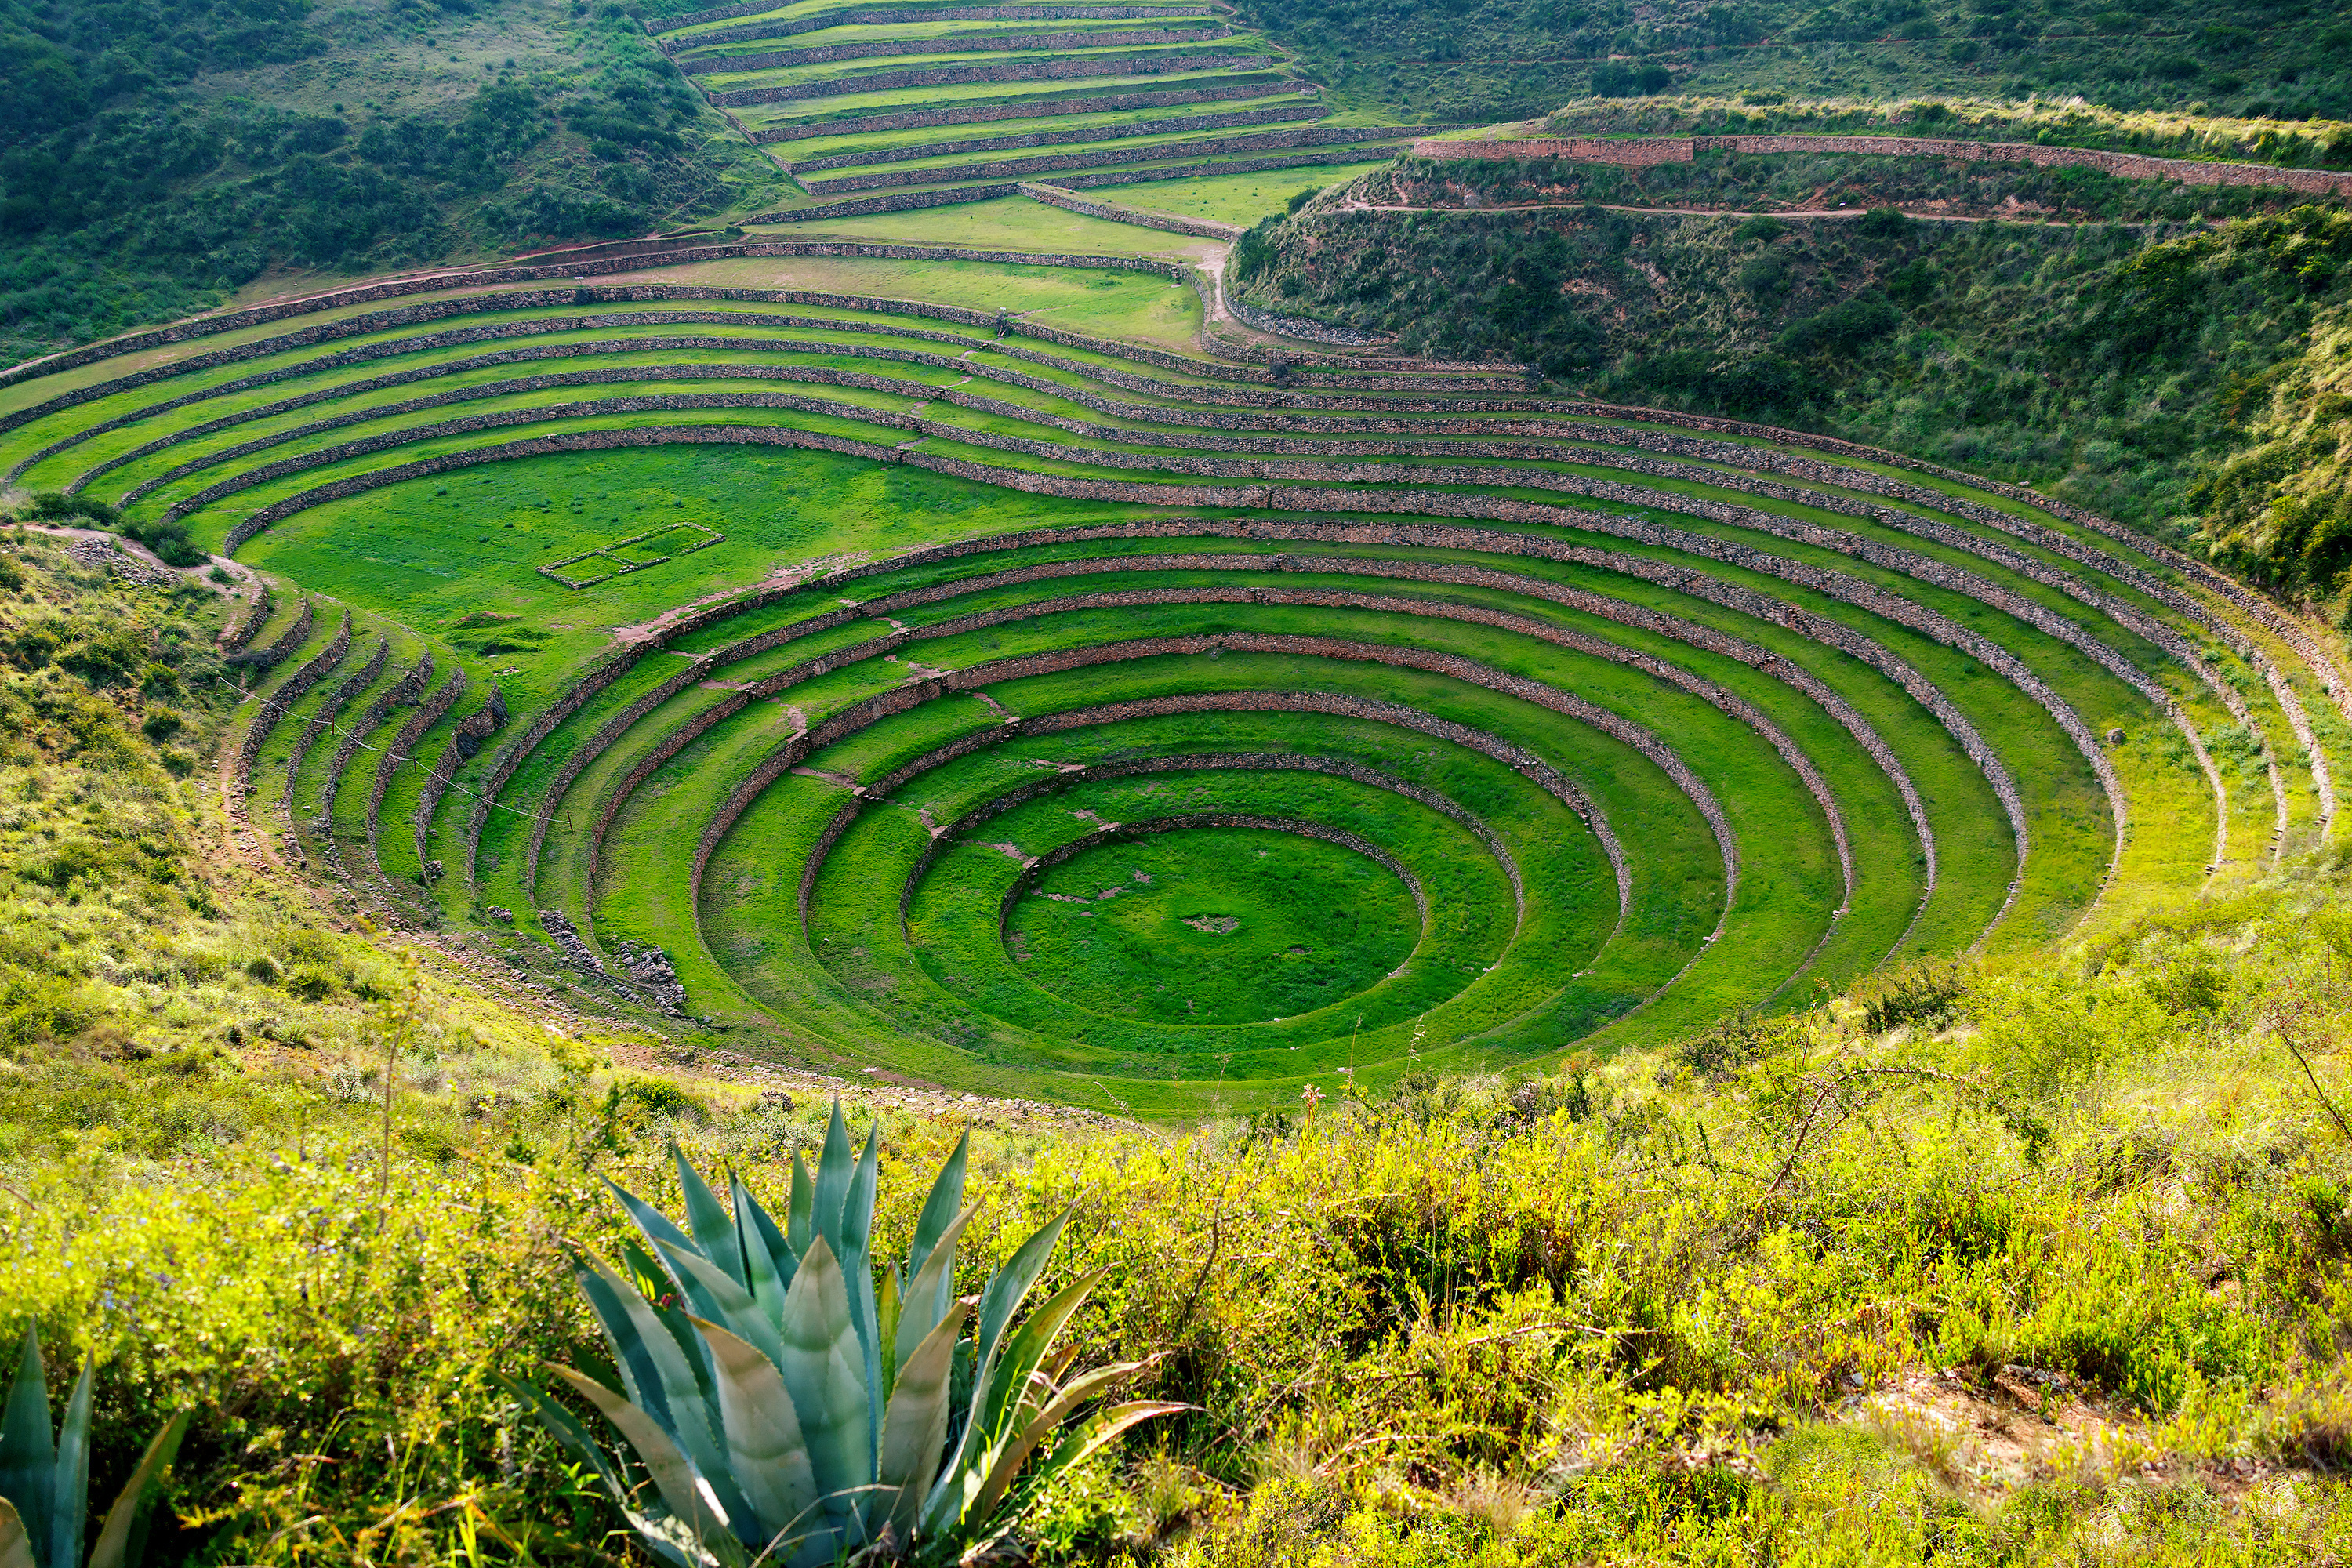 Travel the Sacred Sites of Peru: The Sacred Valley of the Incas